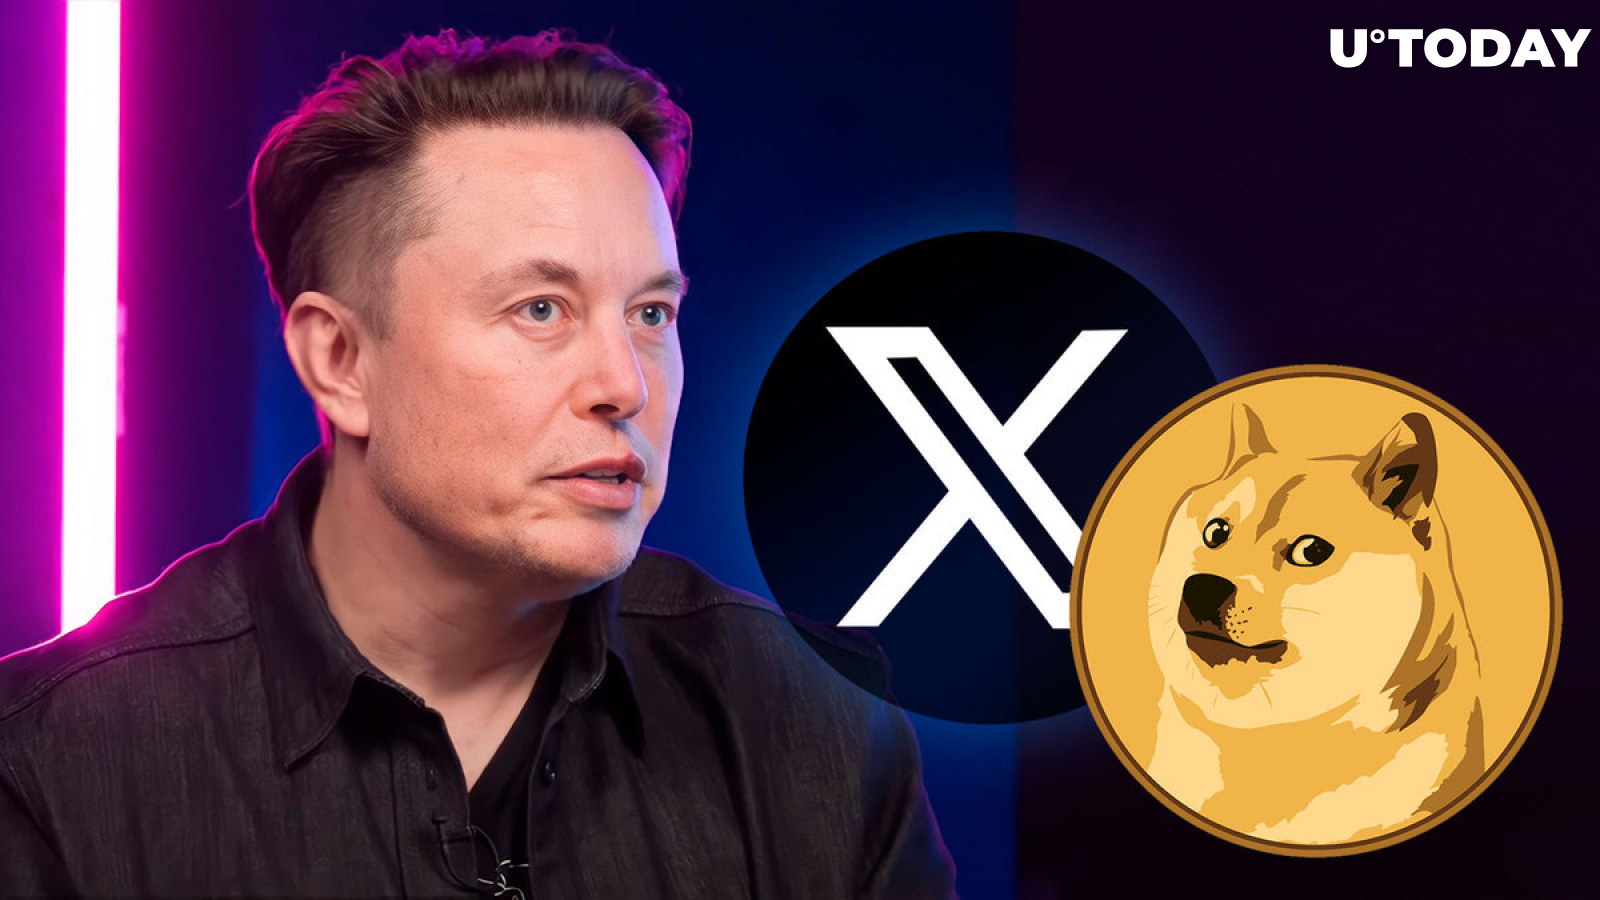 DOGE Jumps as Elon Musk's X App Gets Closer to Crypto Payments Adoption